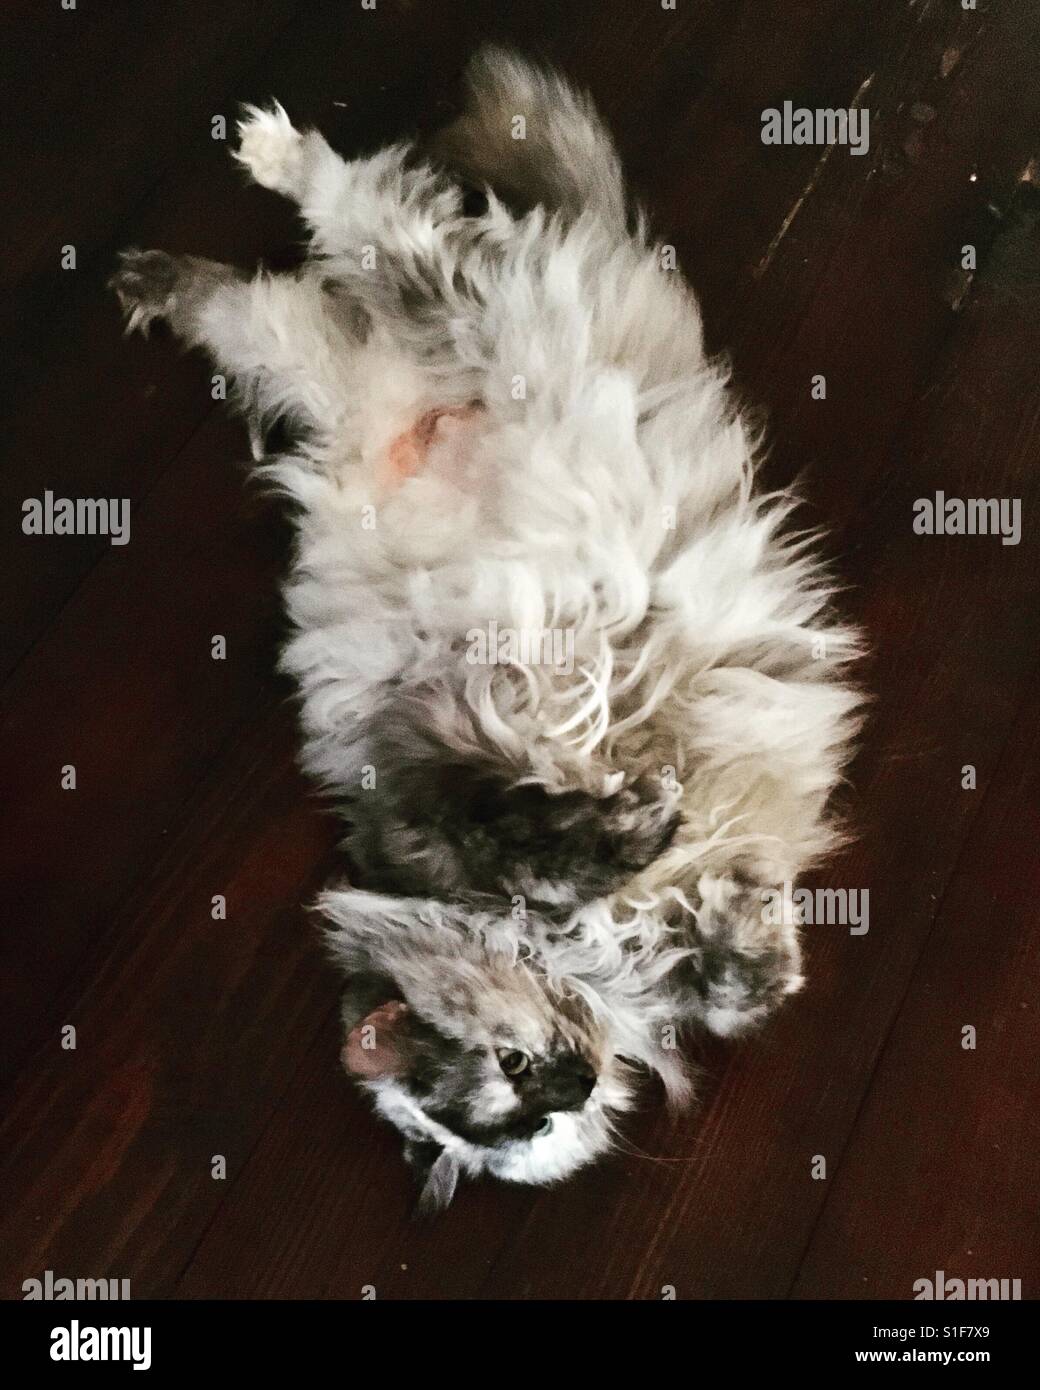 Furry cat Layla Lou napping belly up Stock Photo